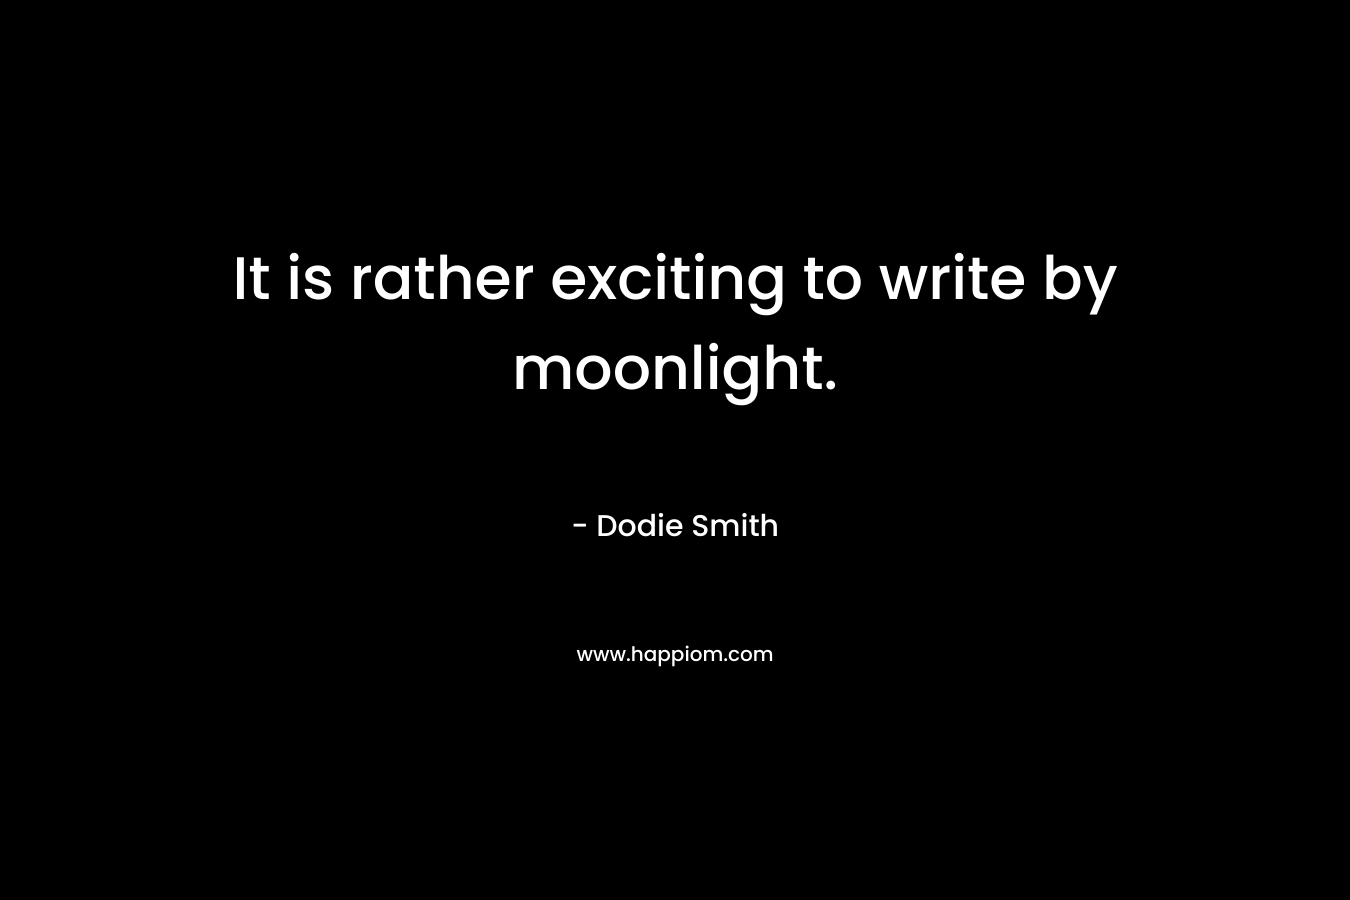 It is rather exciting to write by moonlight. – Dodie Smith